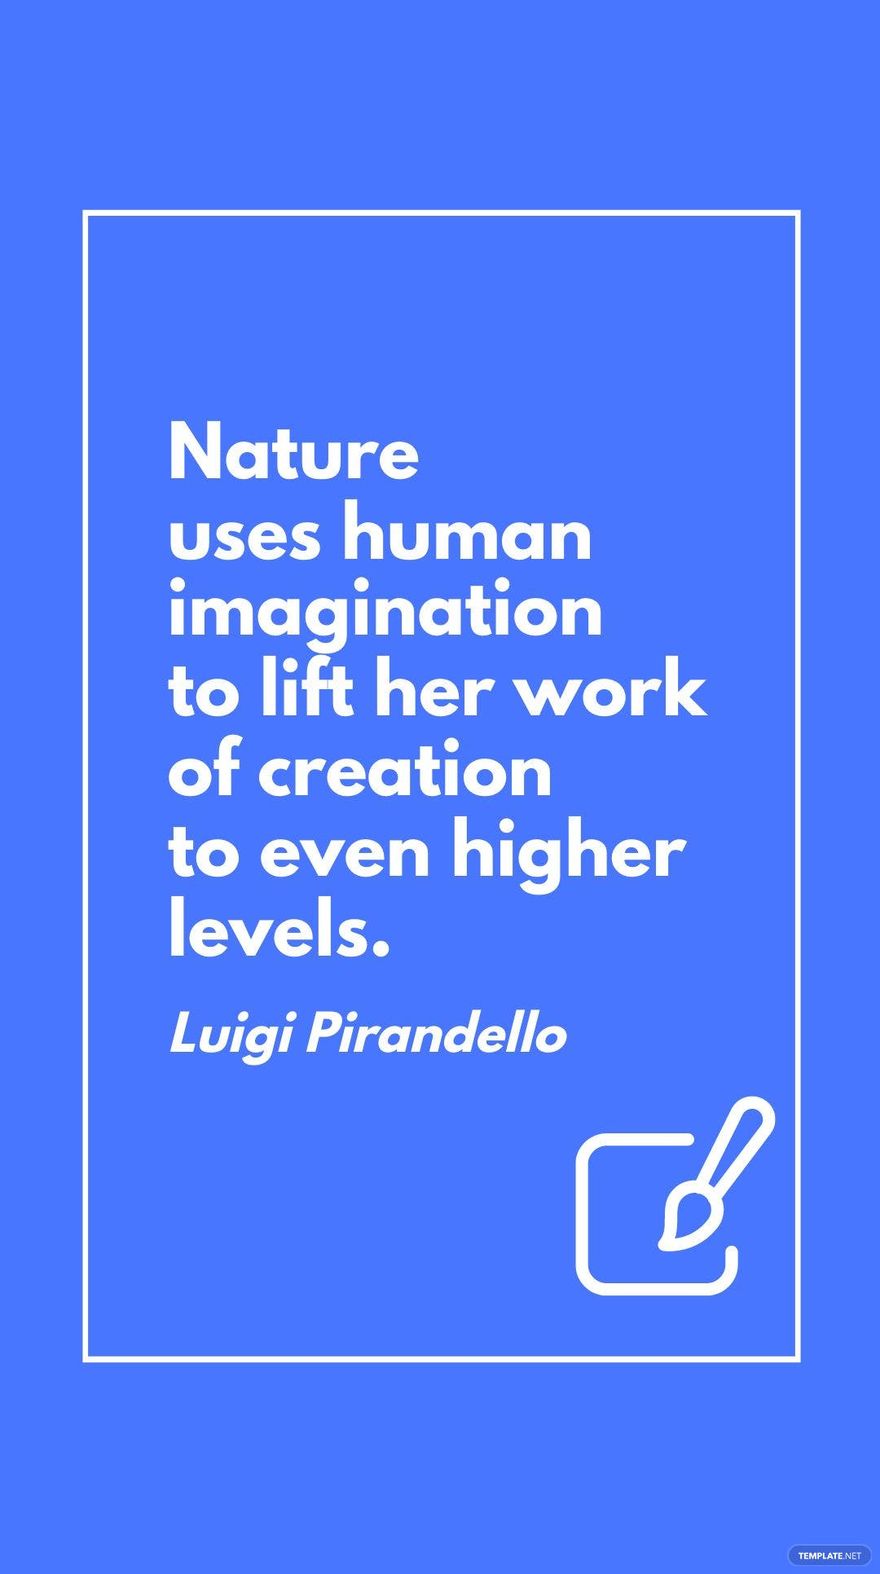 Free Luigi Pirandello - Nature uses human imagination to lift her work of creation to even higher levels. in JPG